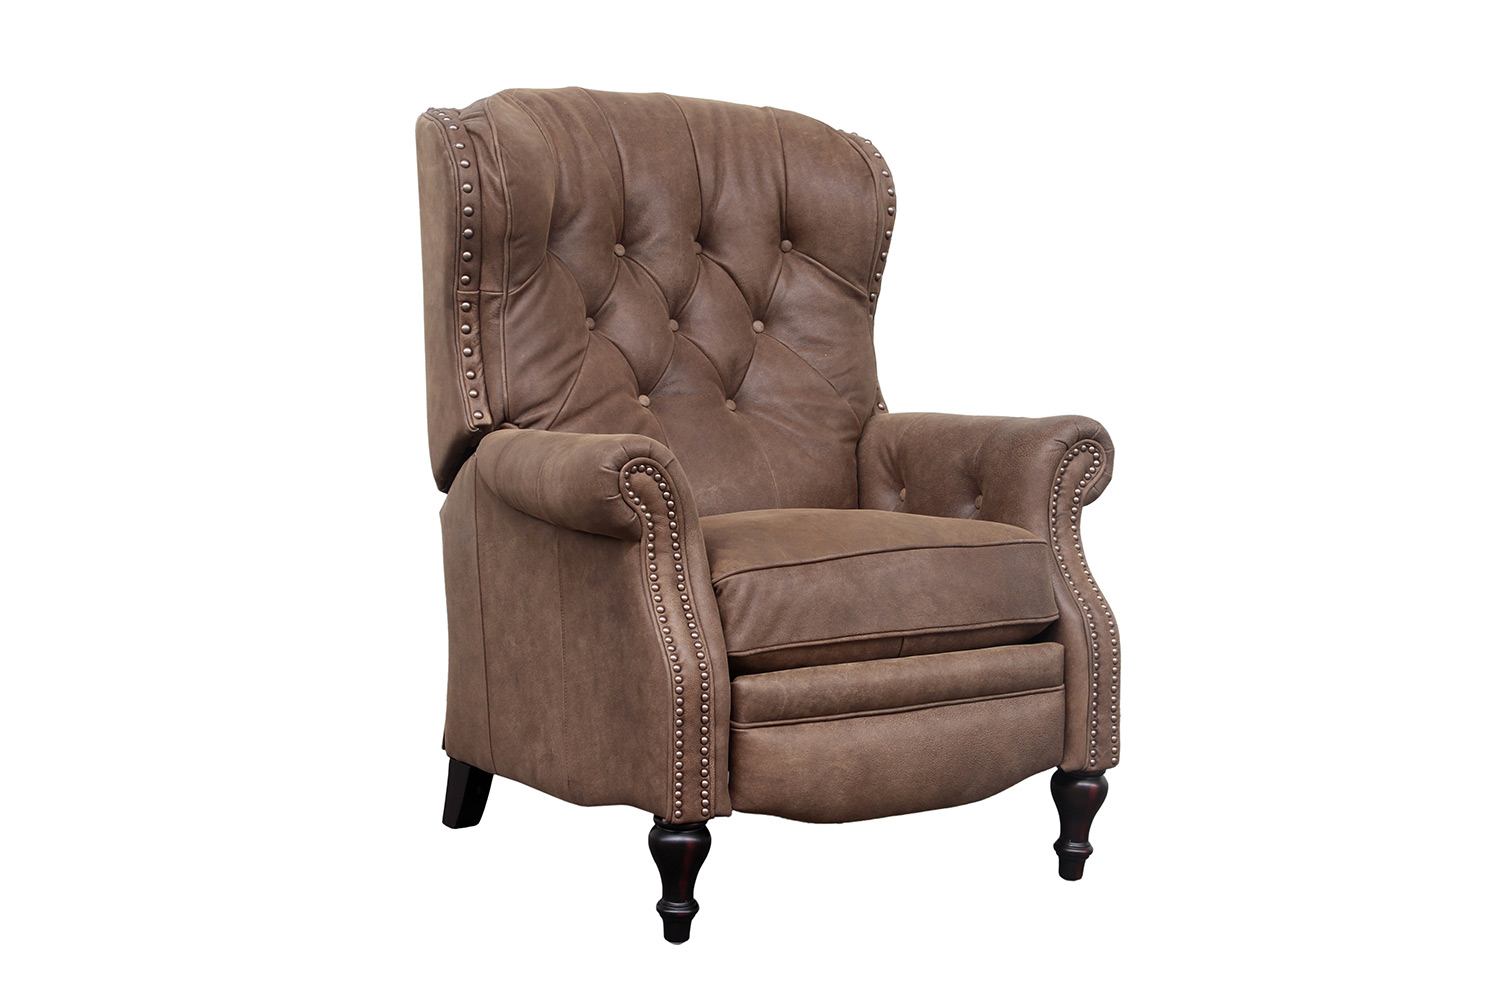 Barcalounger KendAll Recliner Chair - Sanded Dark Bomber/Top Grain Leather